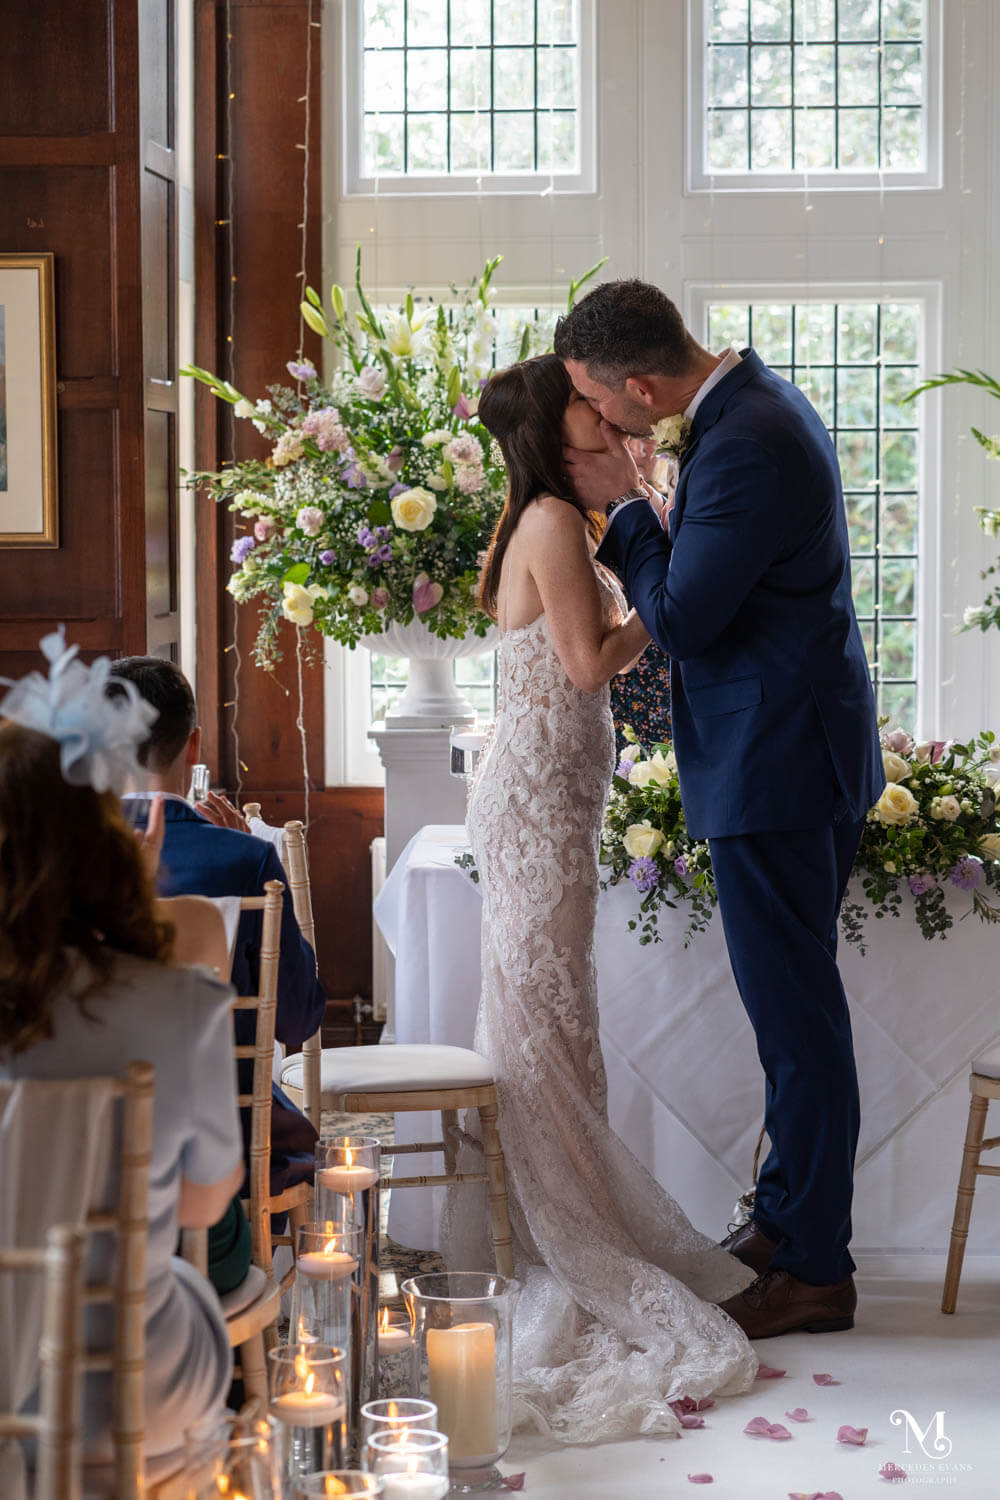 the bride and groom enjoy their first kiss during their wedding ceremony in the Oak room at Cantley House Hotel